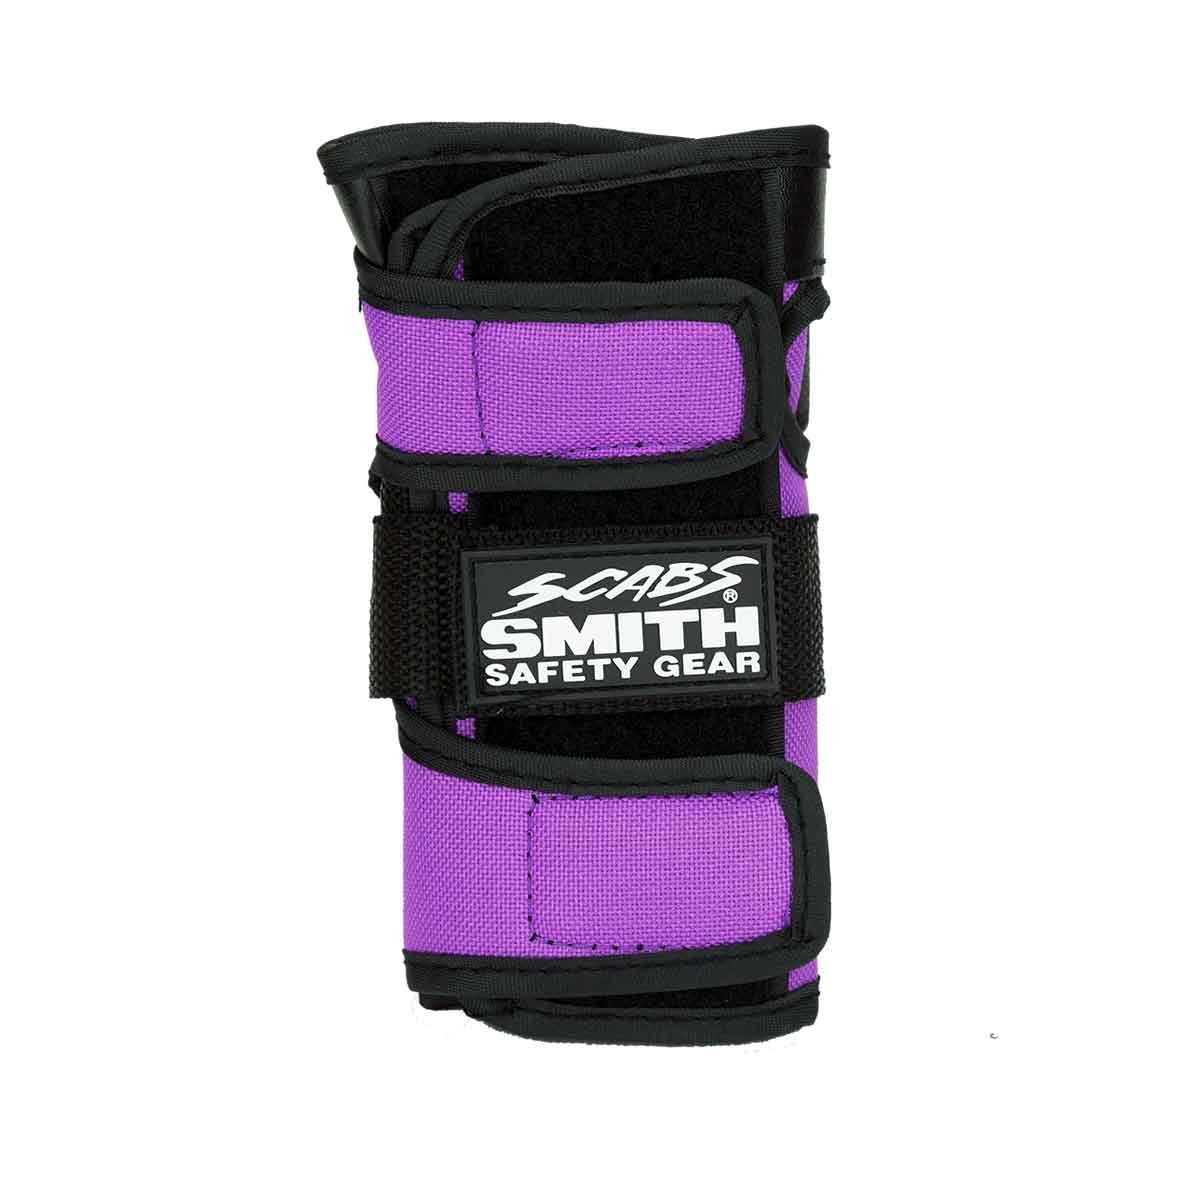 Smith Scabs wrist Safety Gear - Purple pad